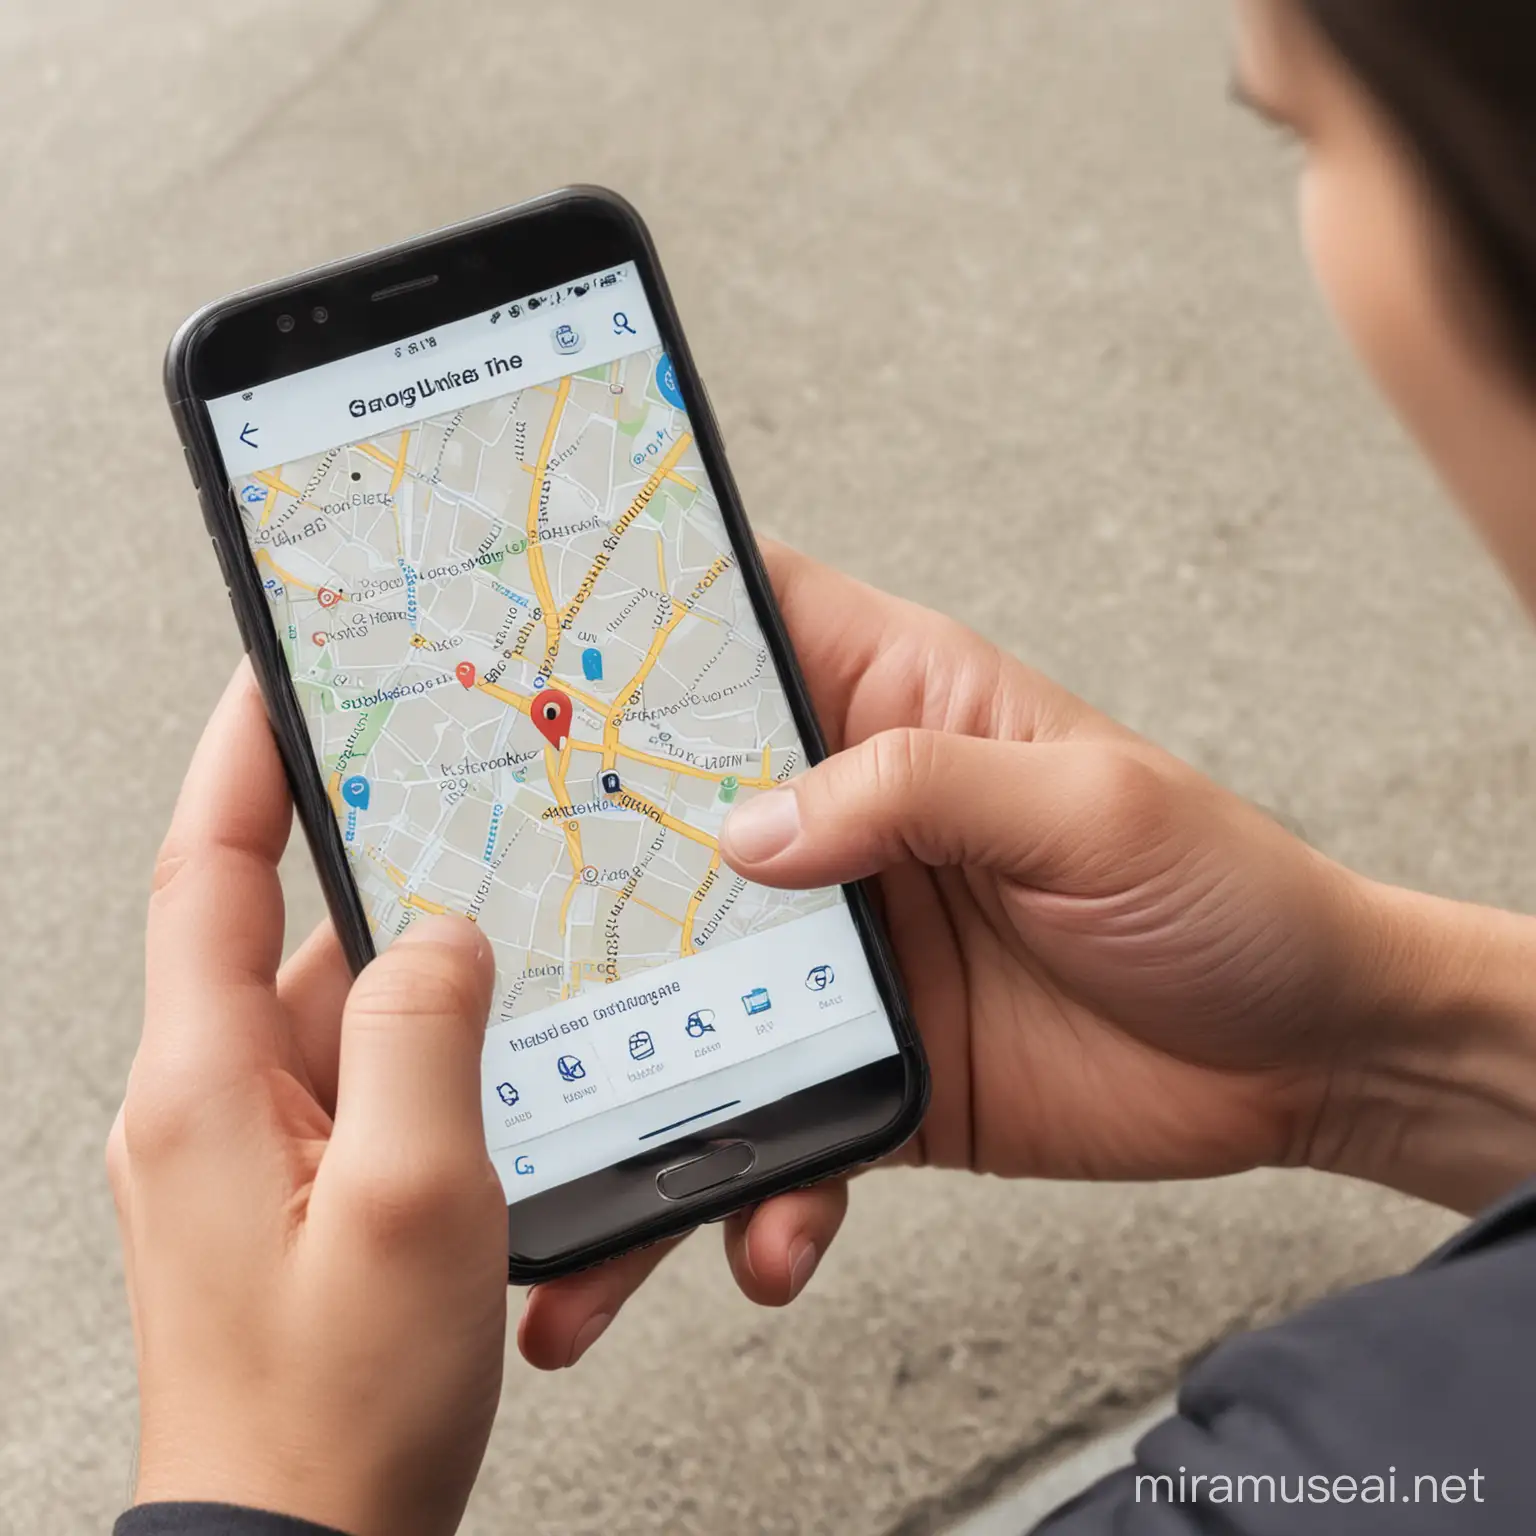 Individual Searching for Business Location on Smartphone